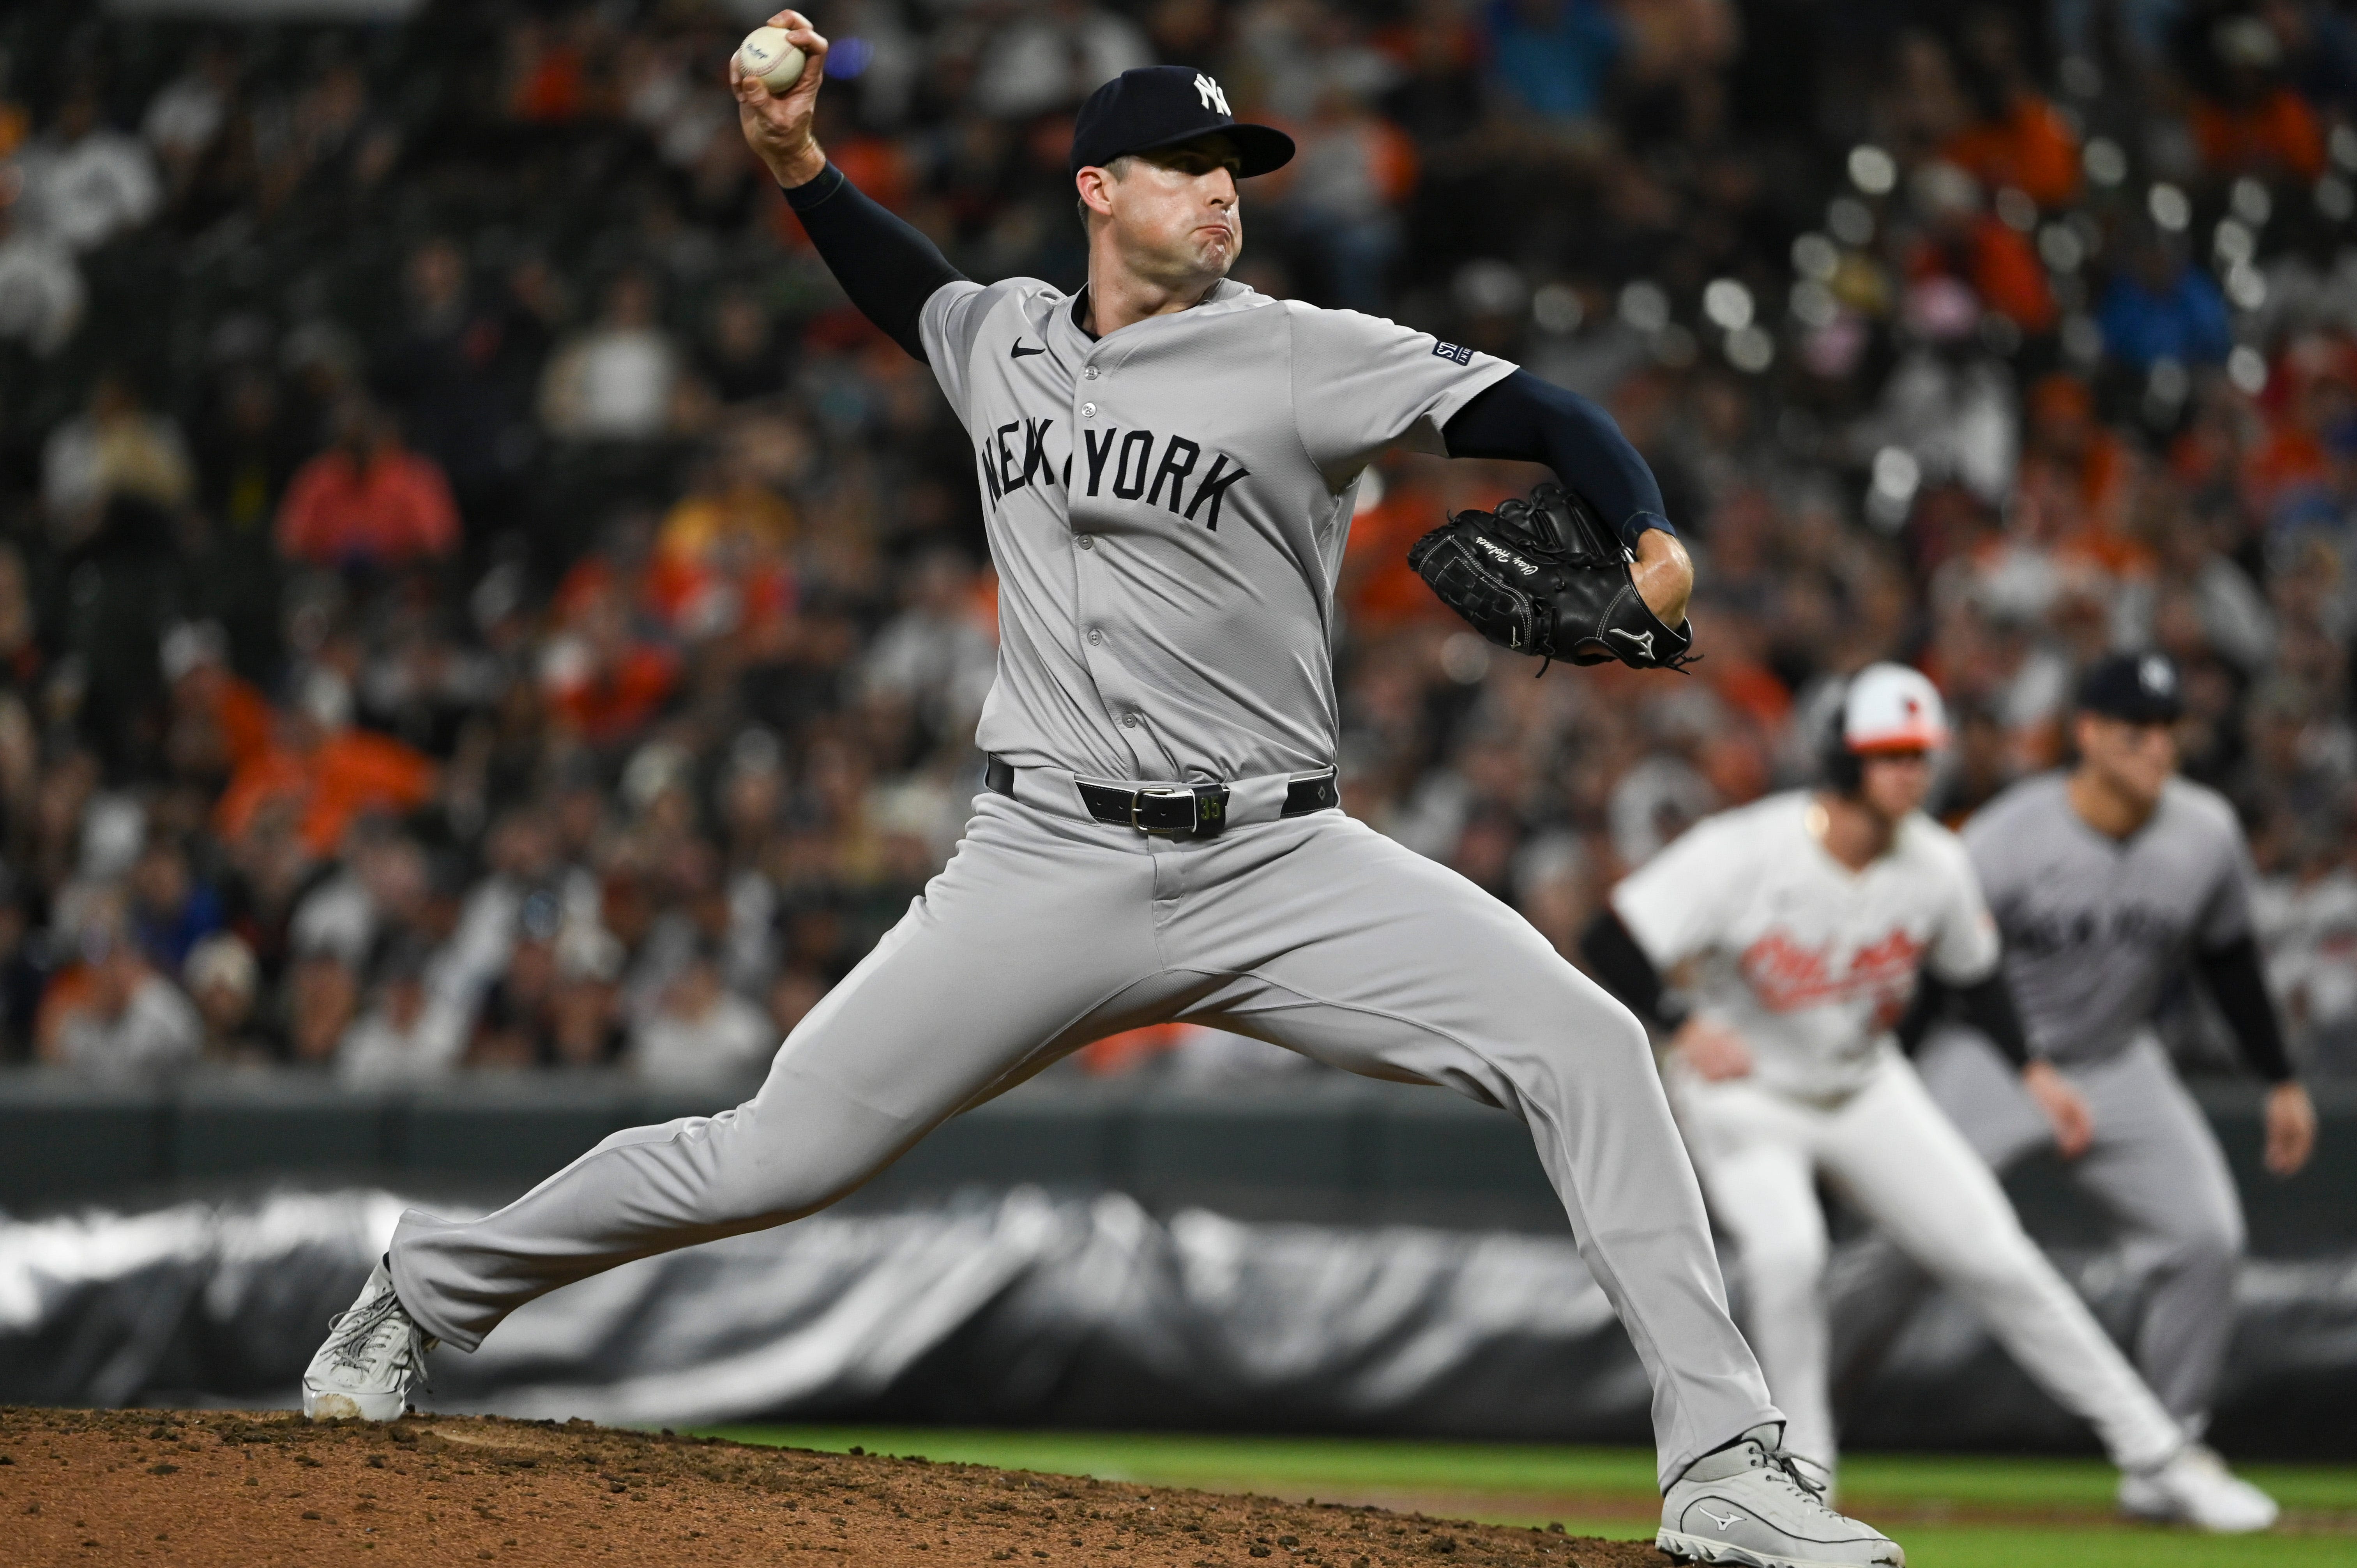 Can the Yankees' dominant bullpen sustain this early success?